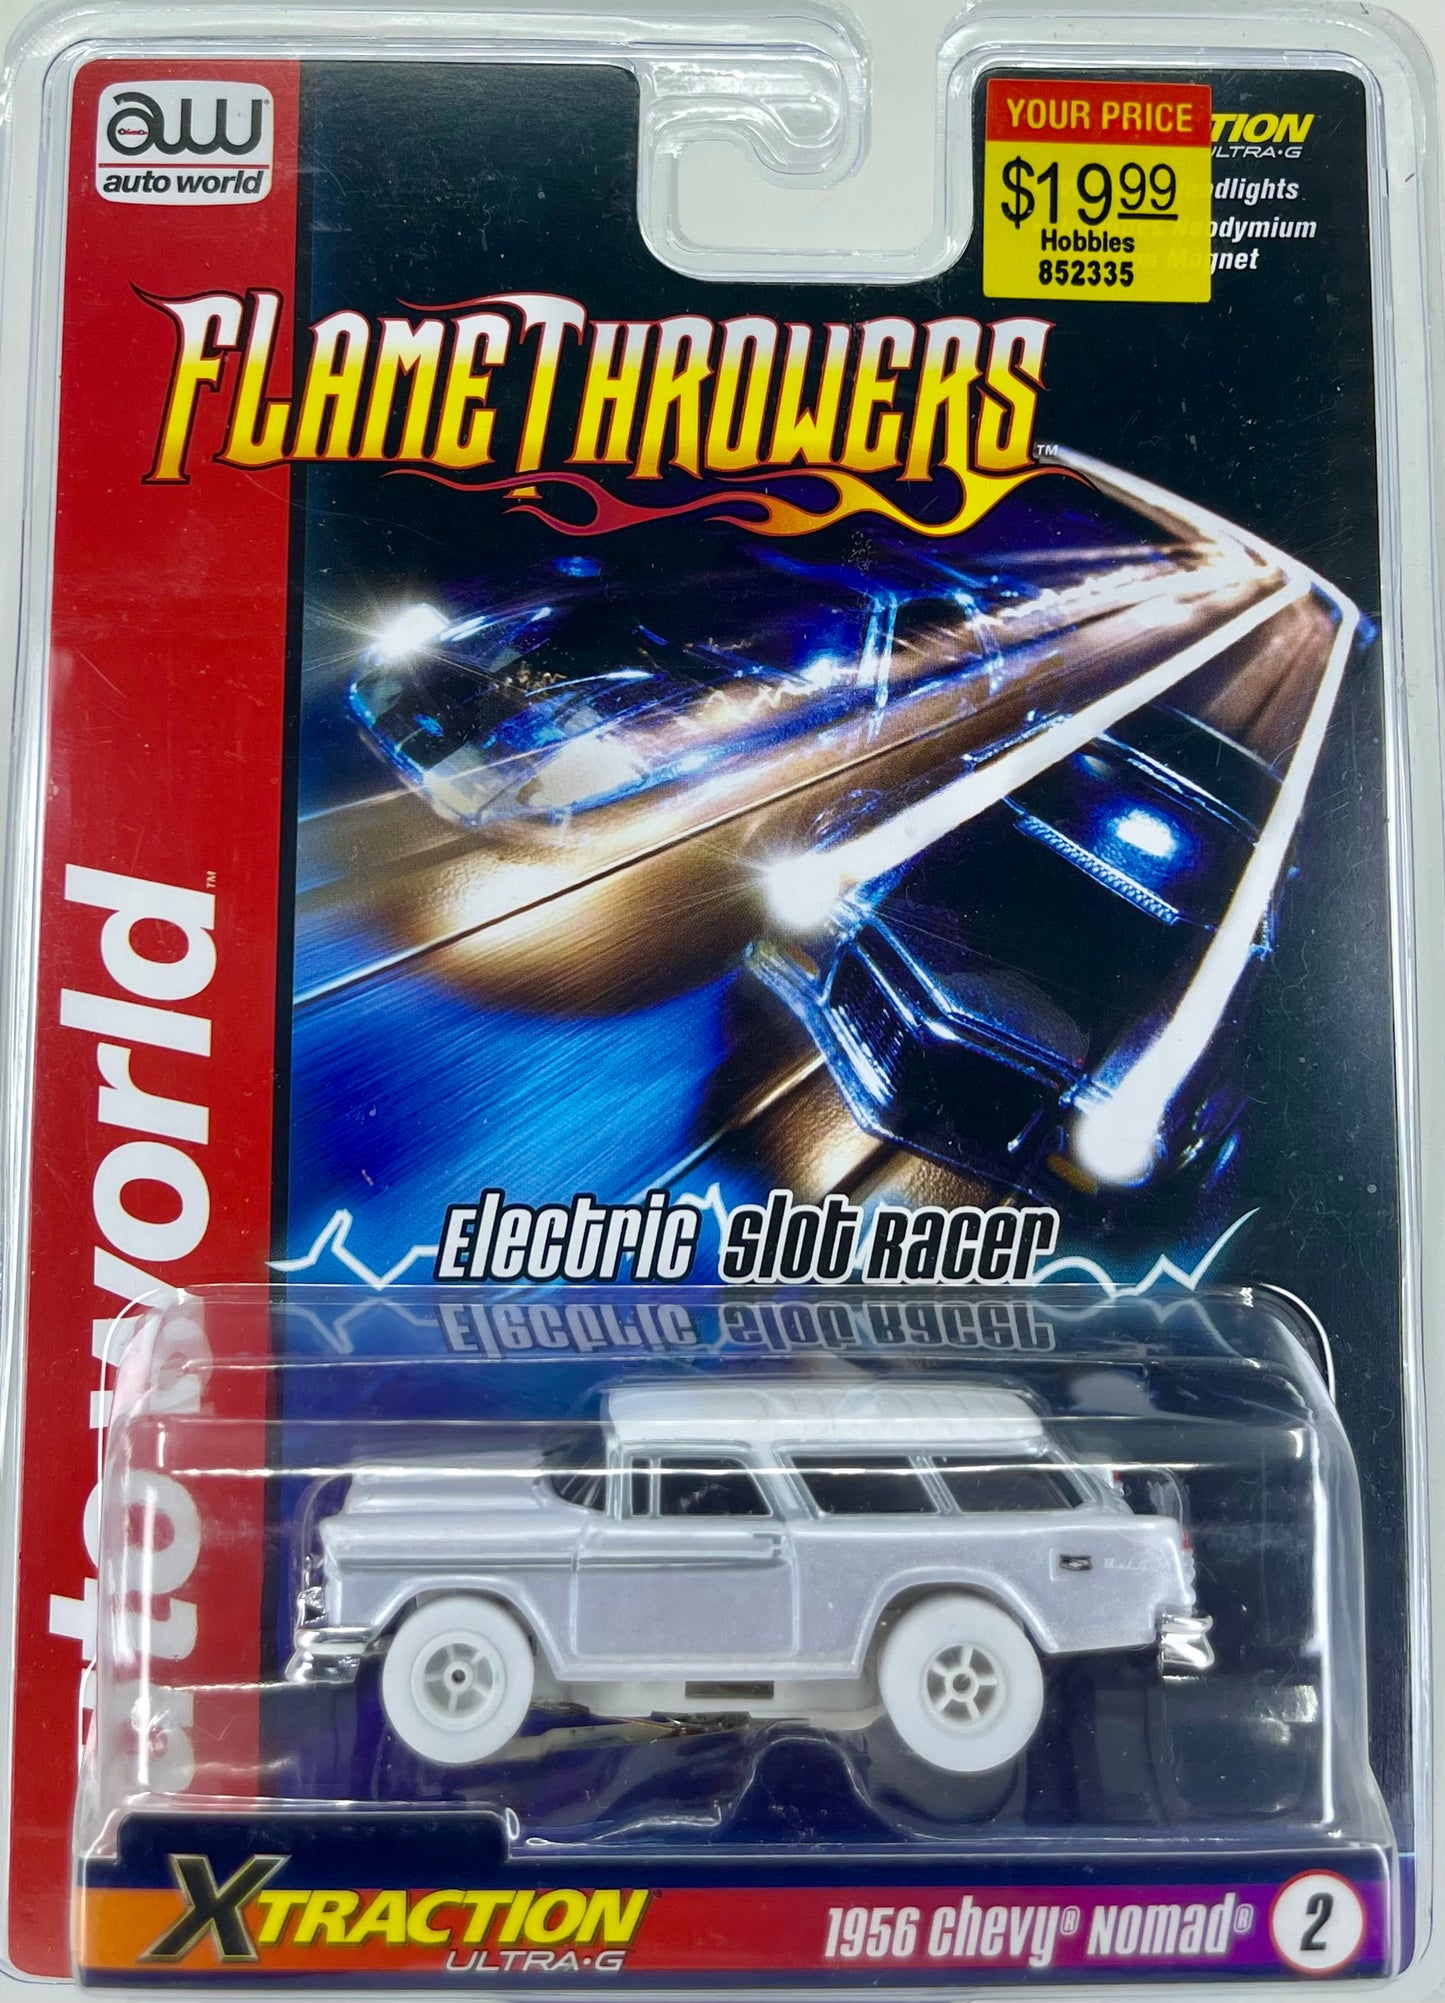 1956 Chevy Nomad Flame Thrower iWheels Chase H.O. Scale Slot Car, Xtraction Chassis